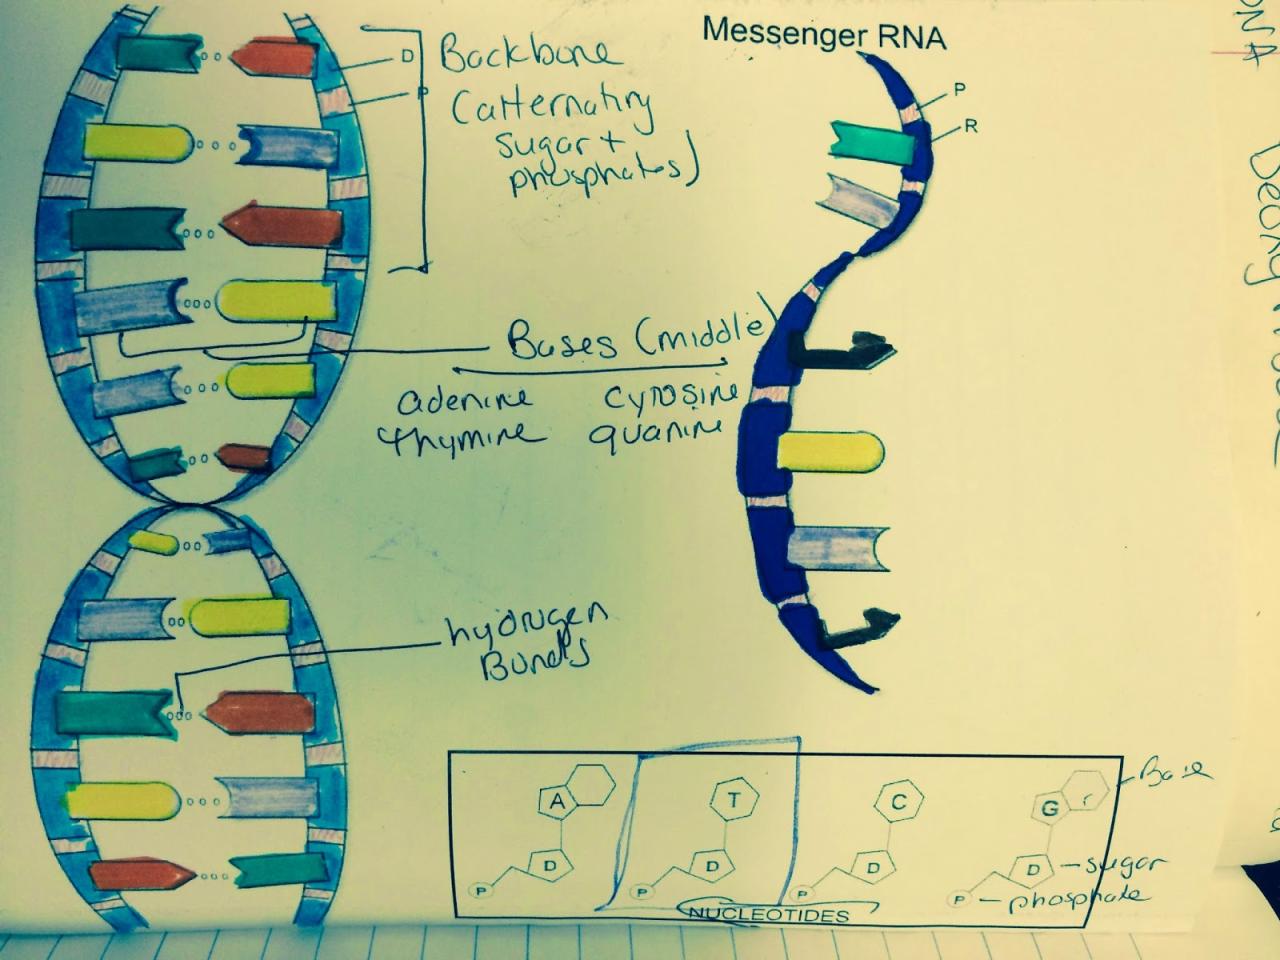 Mrs. Greeley Howard’s Biology Class DNA coloring notes and questions